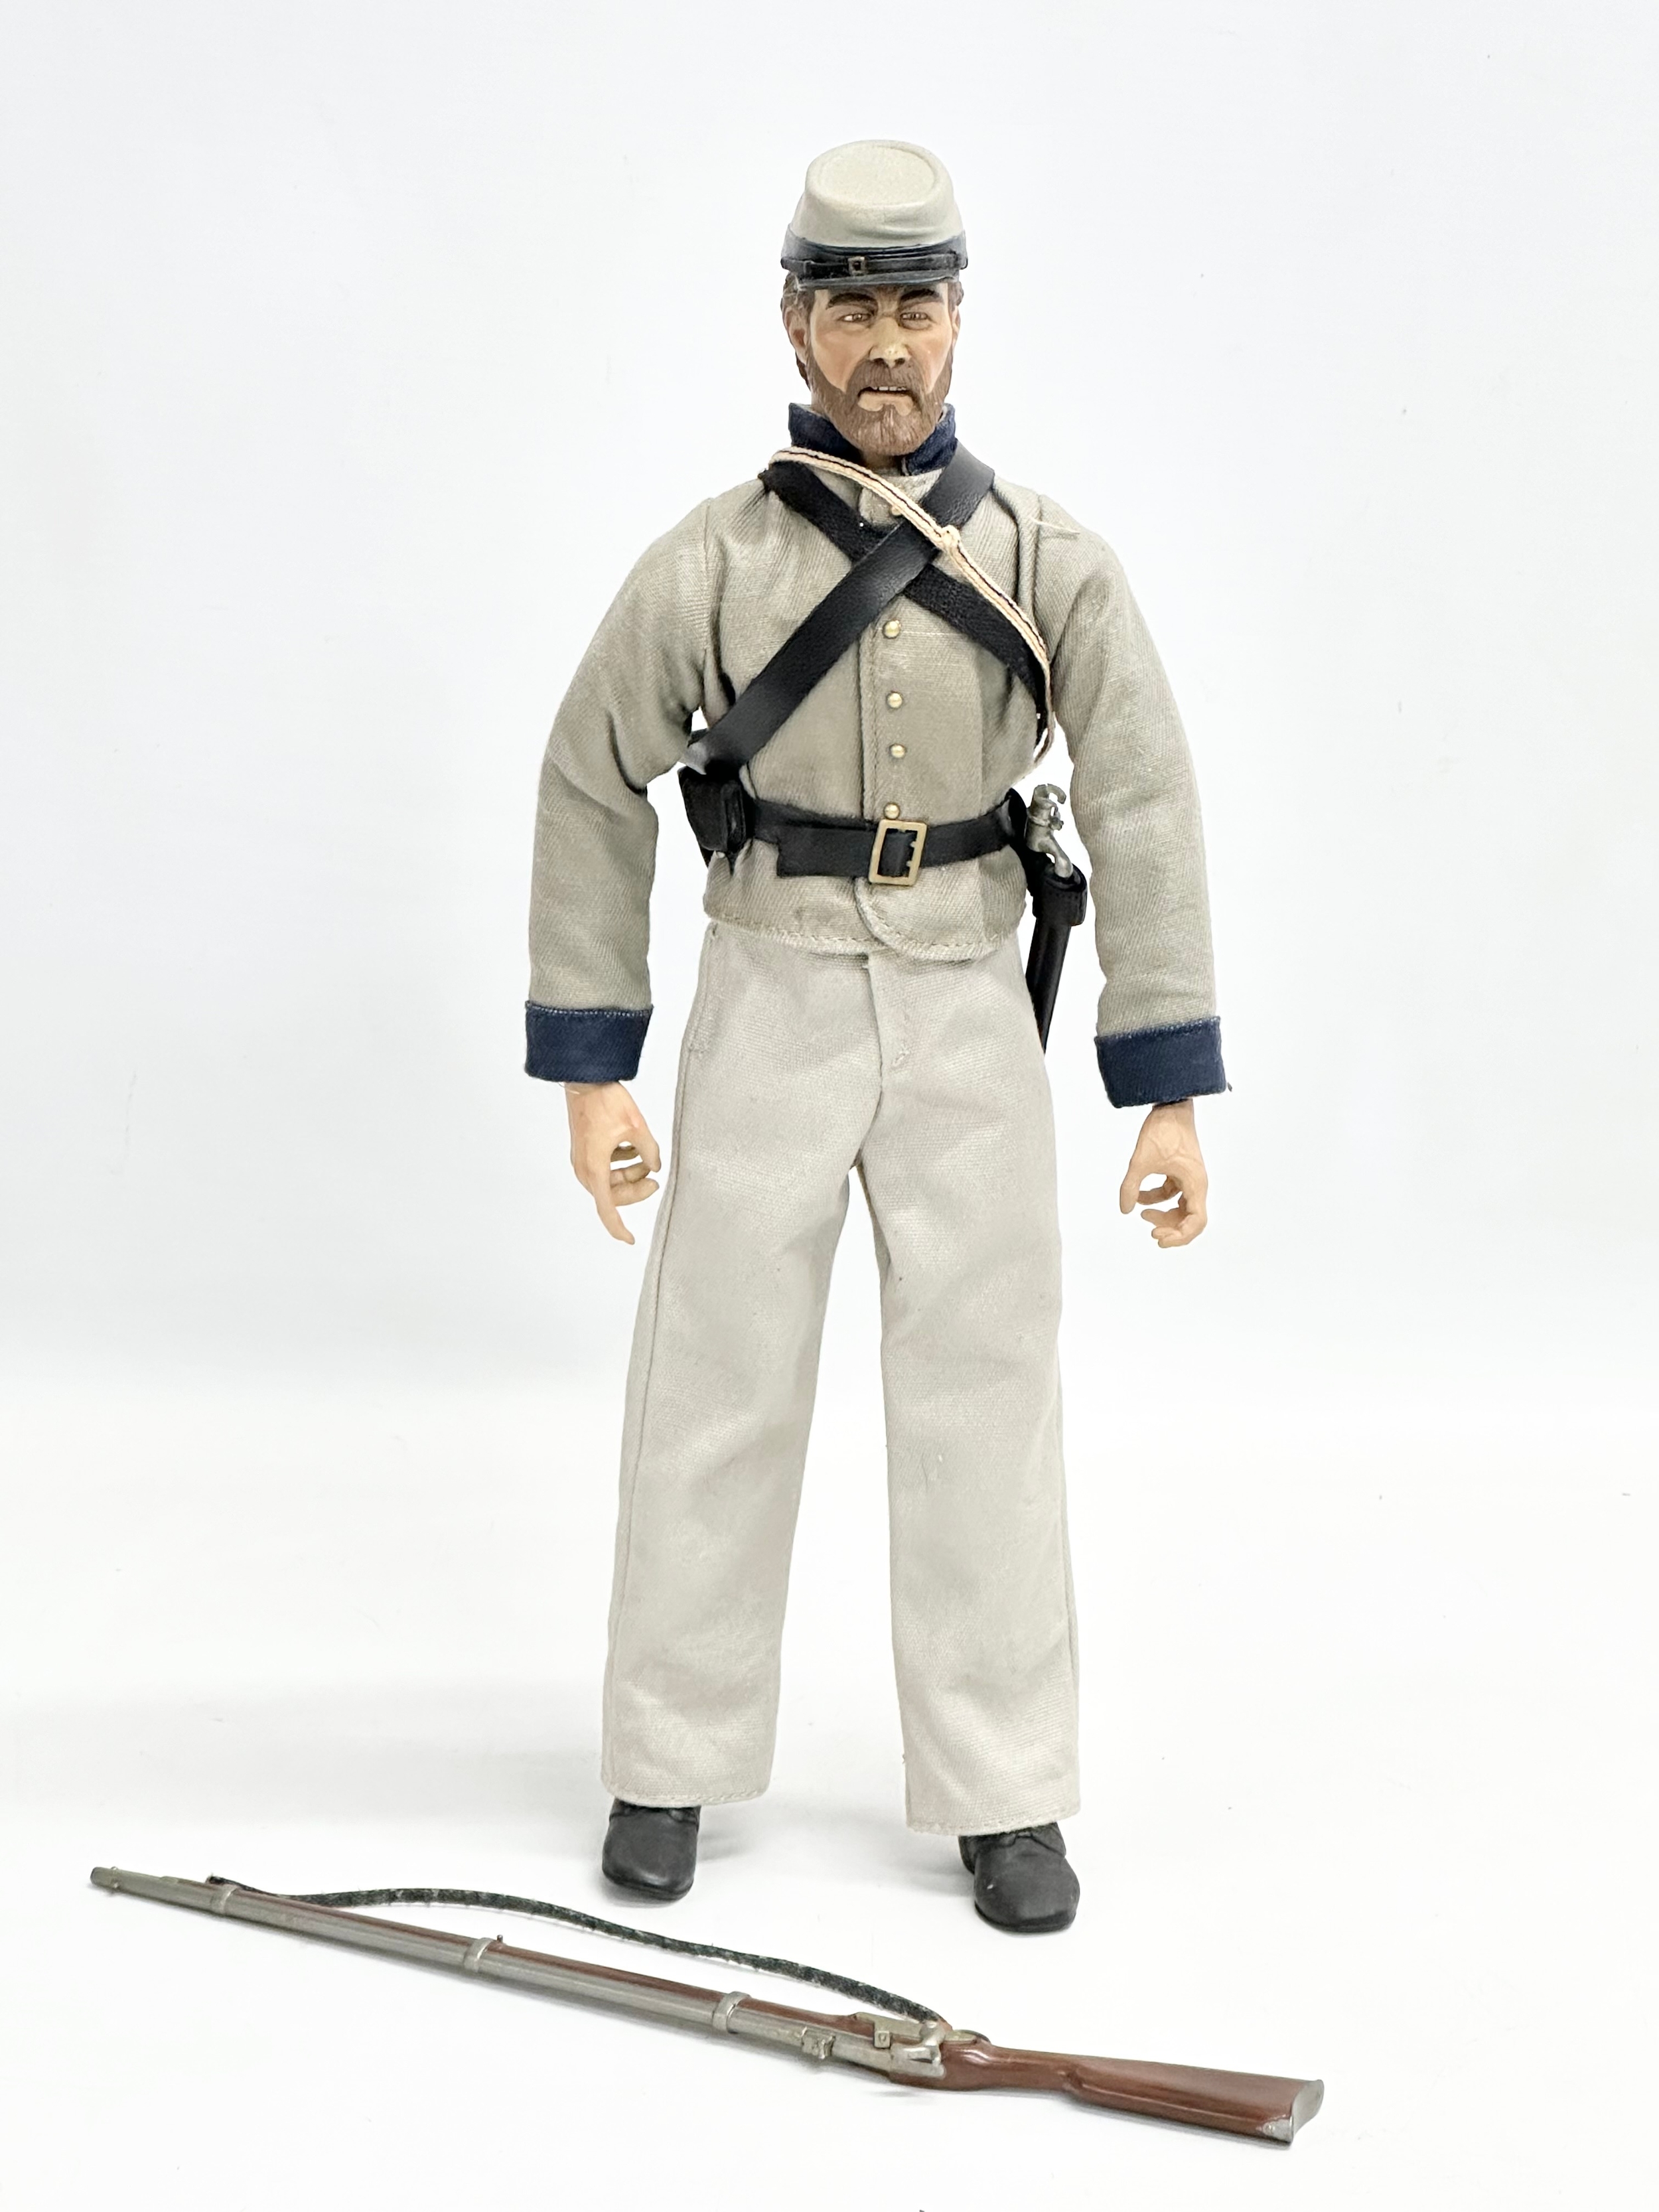 A Sideshow Toys American Civil War Brotherhood of Arms Confederate Infantry Action Figure. 32.5cm